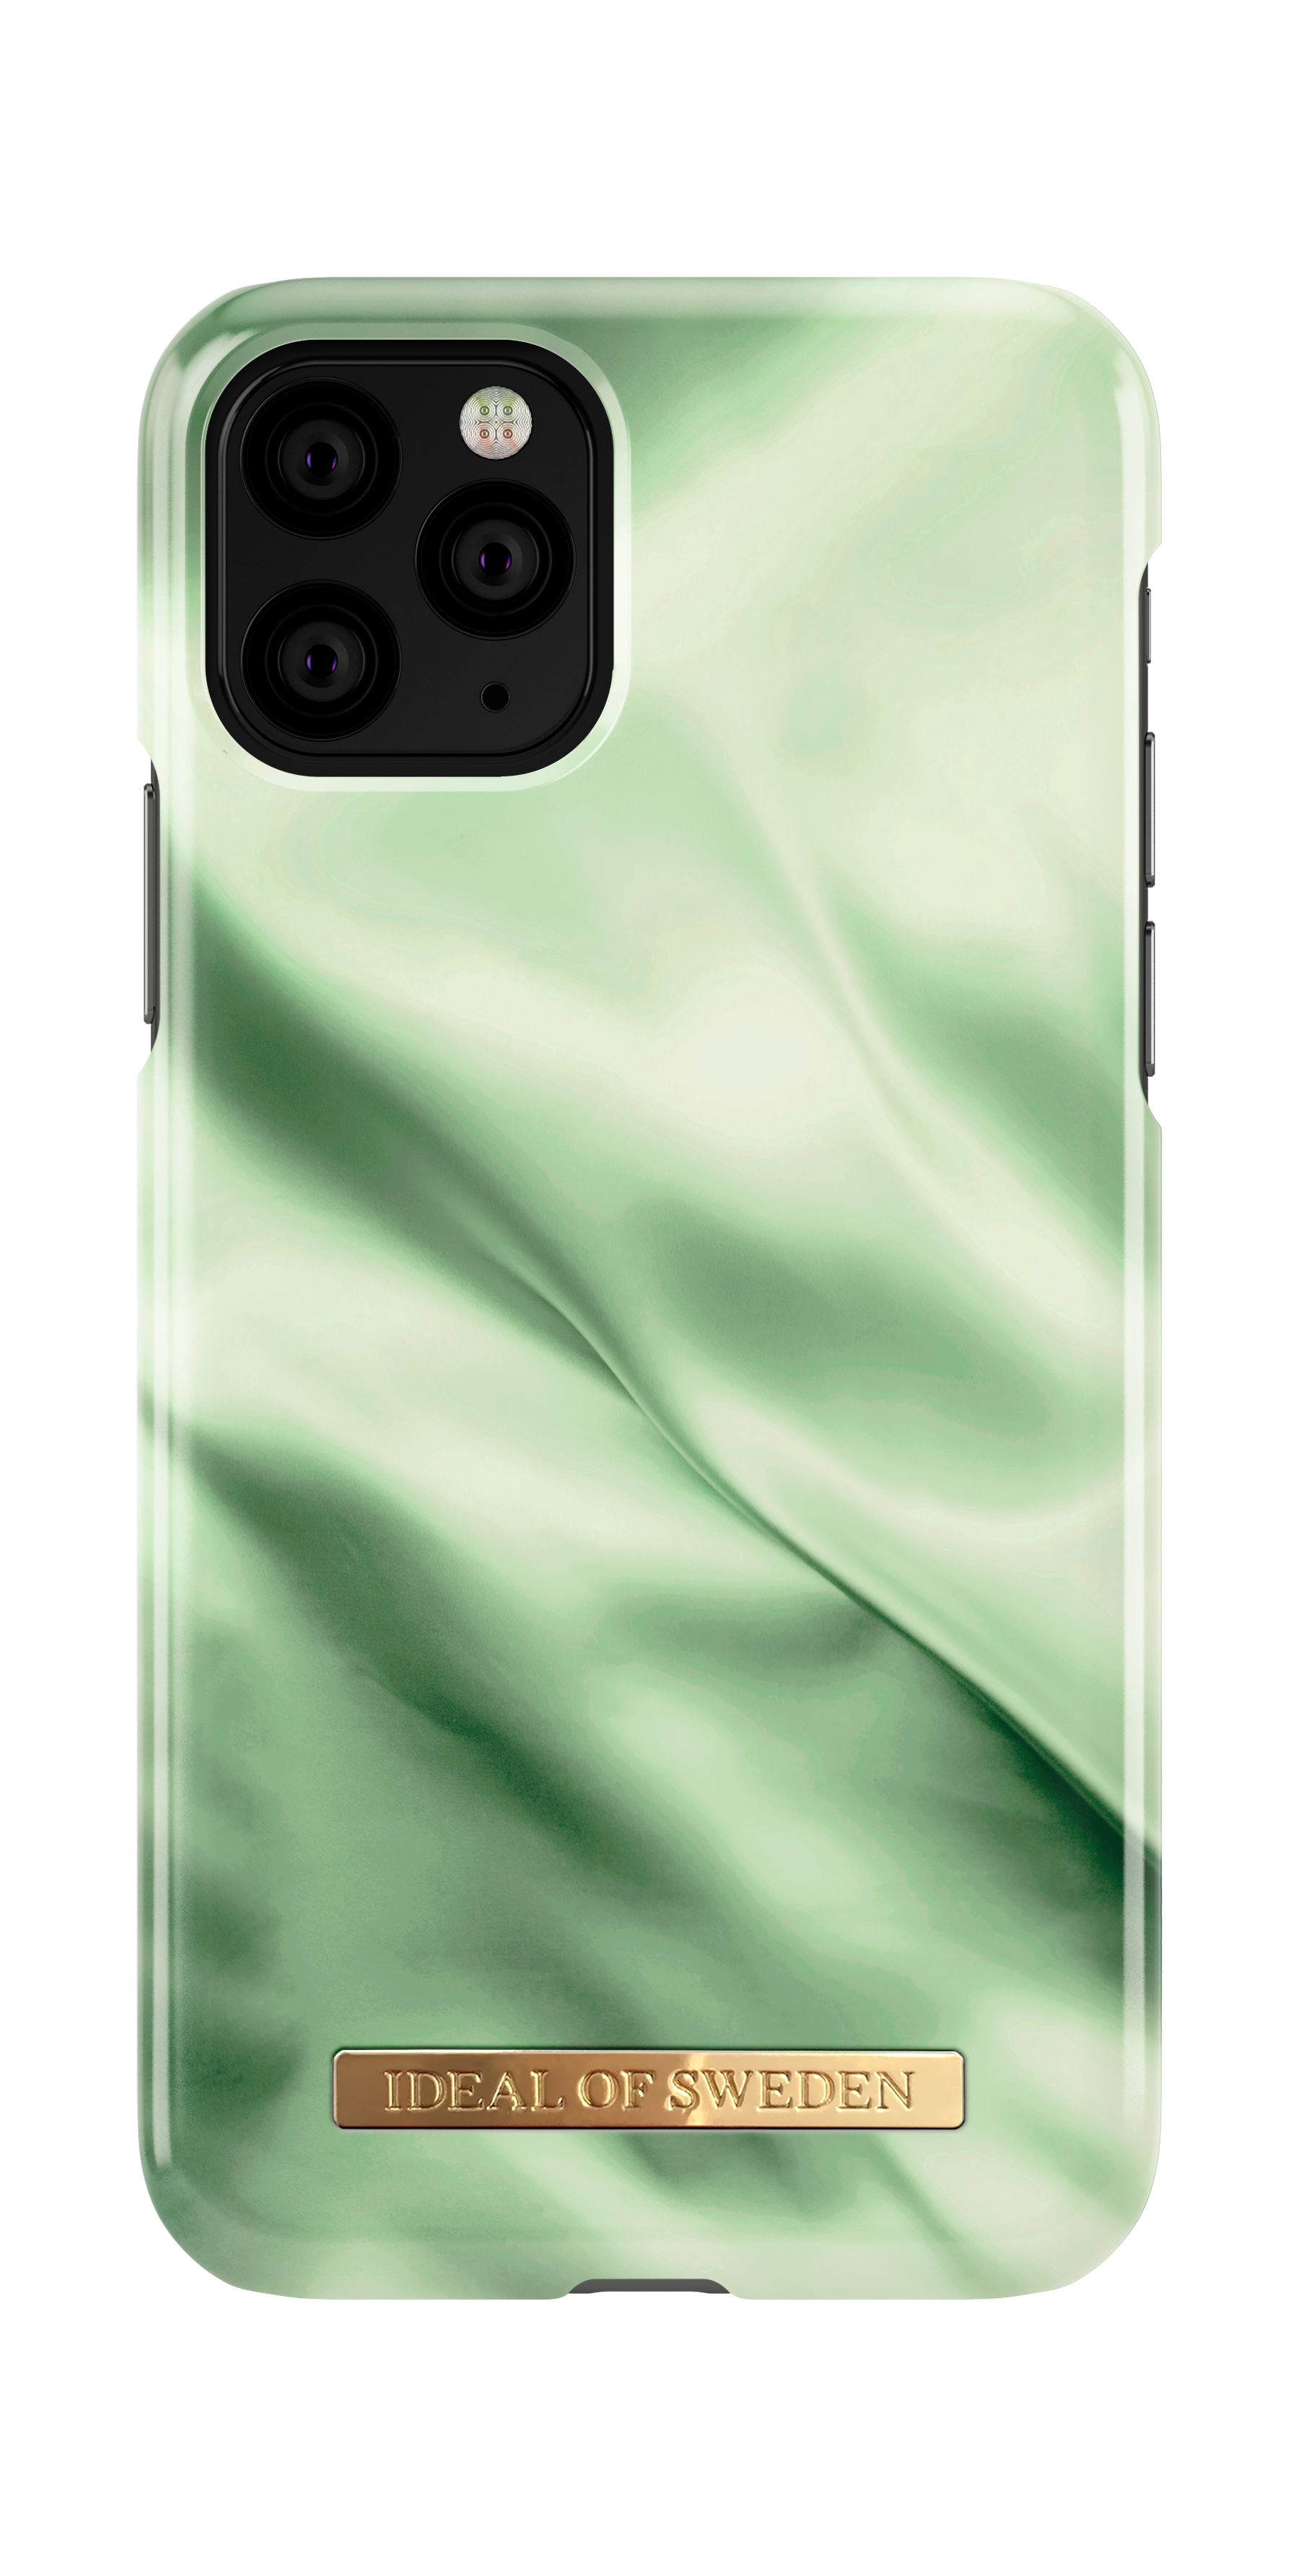 IDEAL OF 11 X, SWEDEN XS, iPhone Pro, Apple, iPhone iPhone Backcover, Satin IDFCSC19-I1958-189, Pistachio